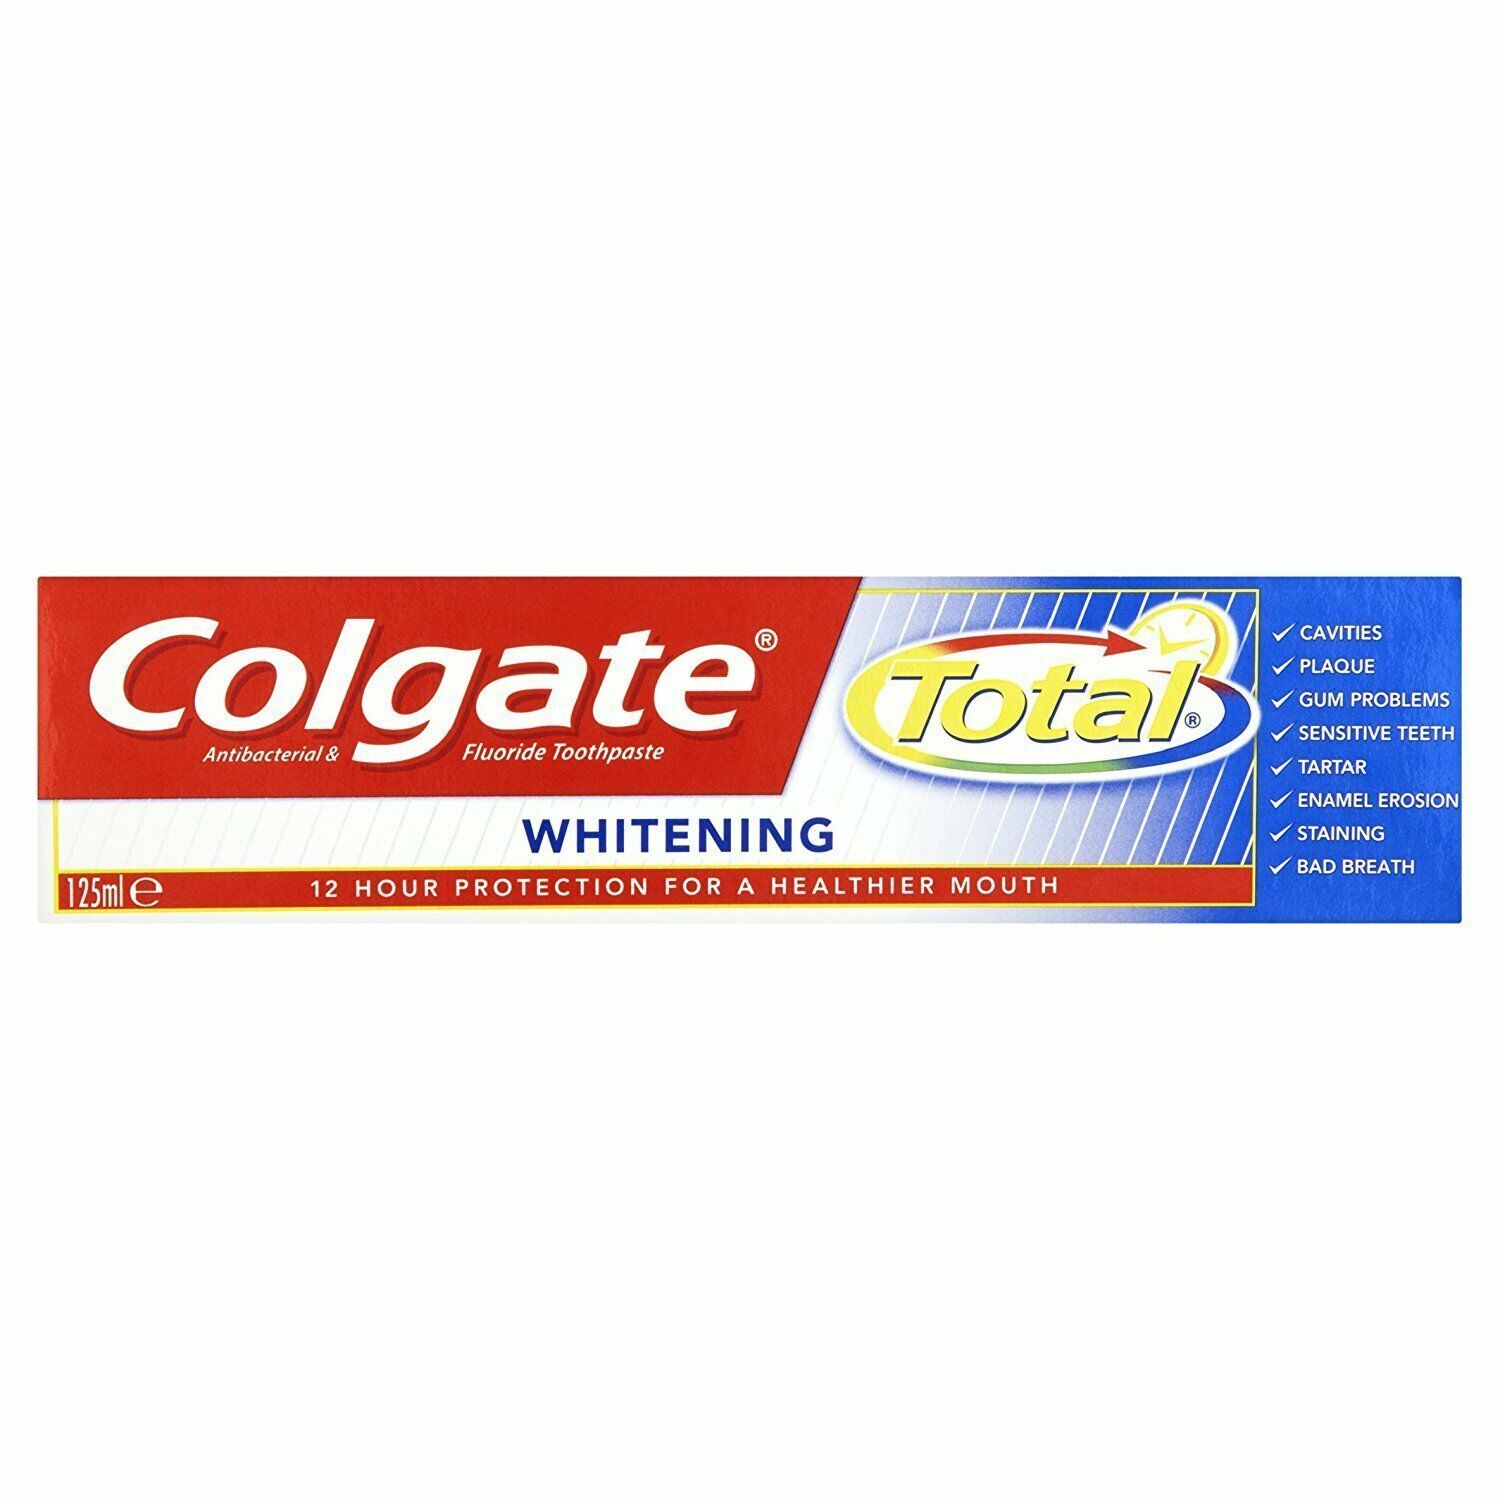 Colgate Total Advanced Whitening Antibacterial and Fluoride Toothpaste 125ml